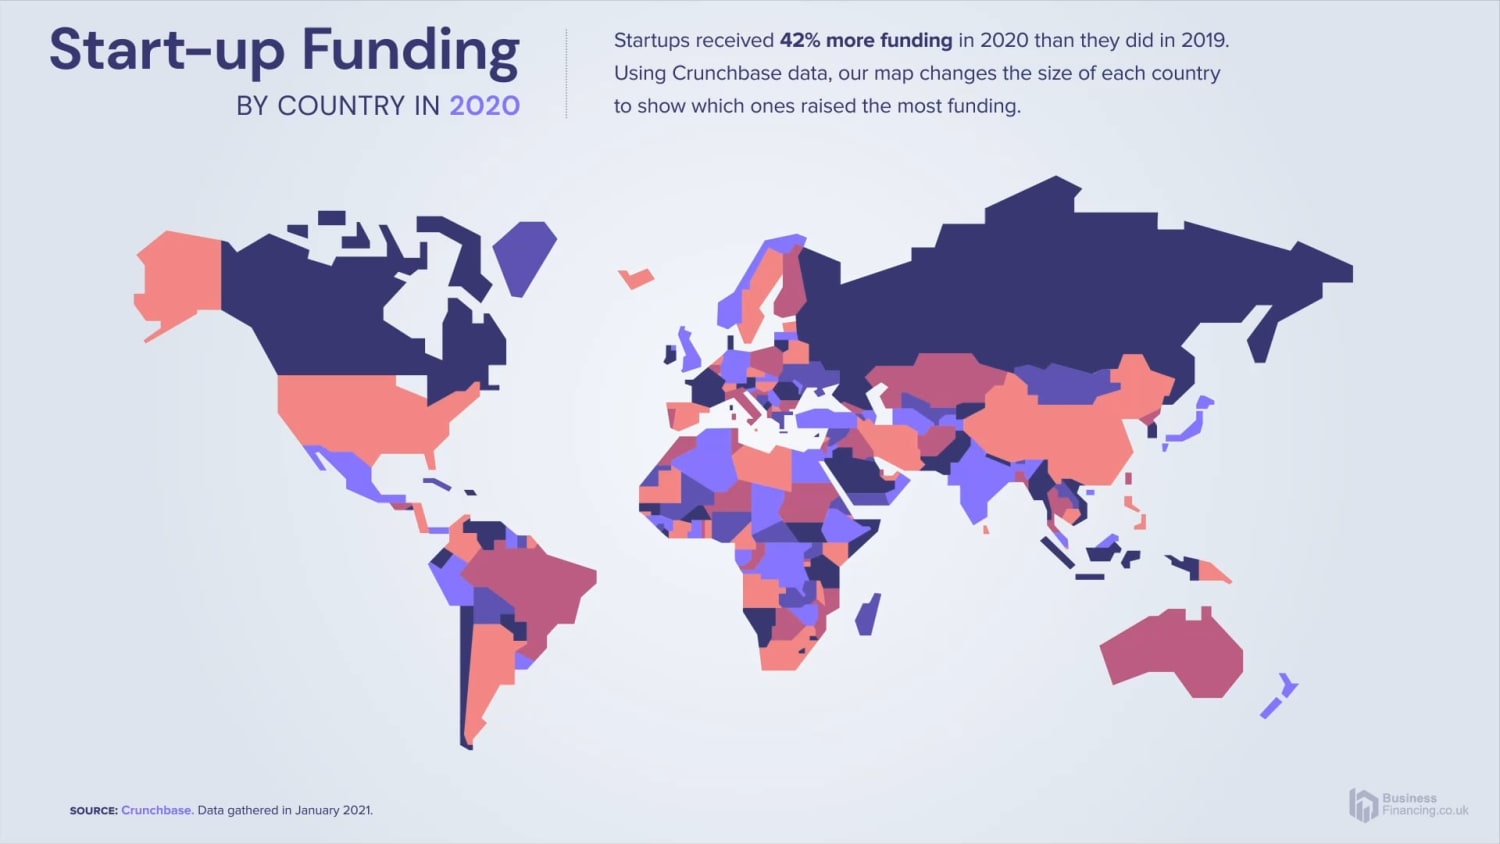 Start-up Funding by Country in 2020